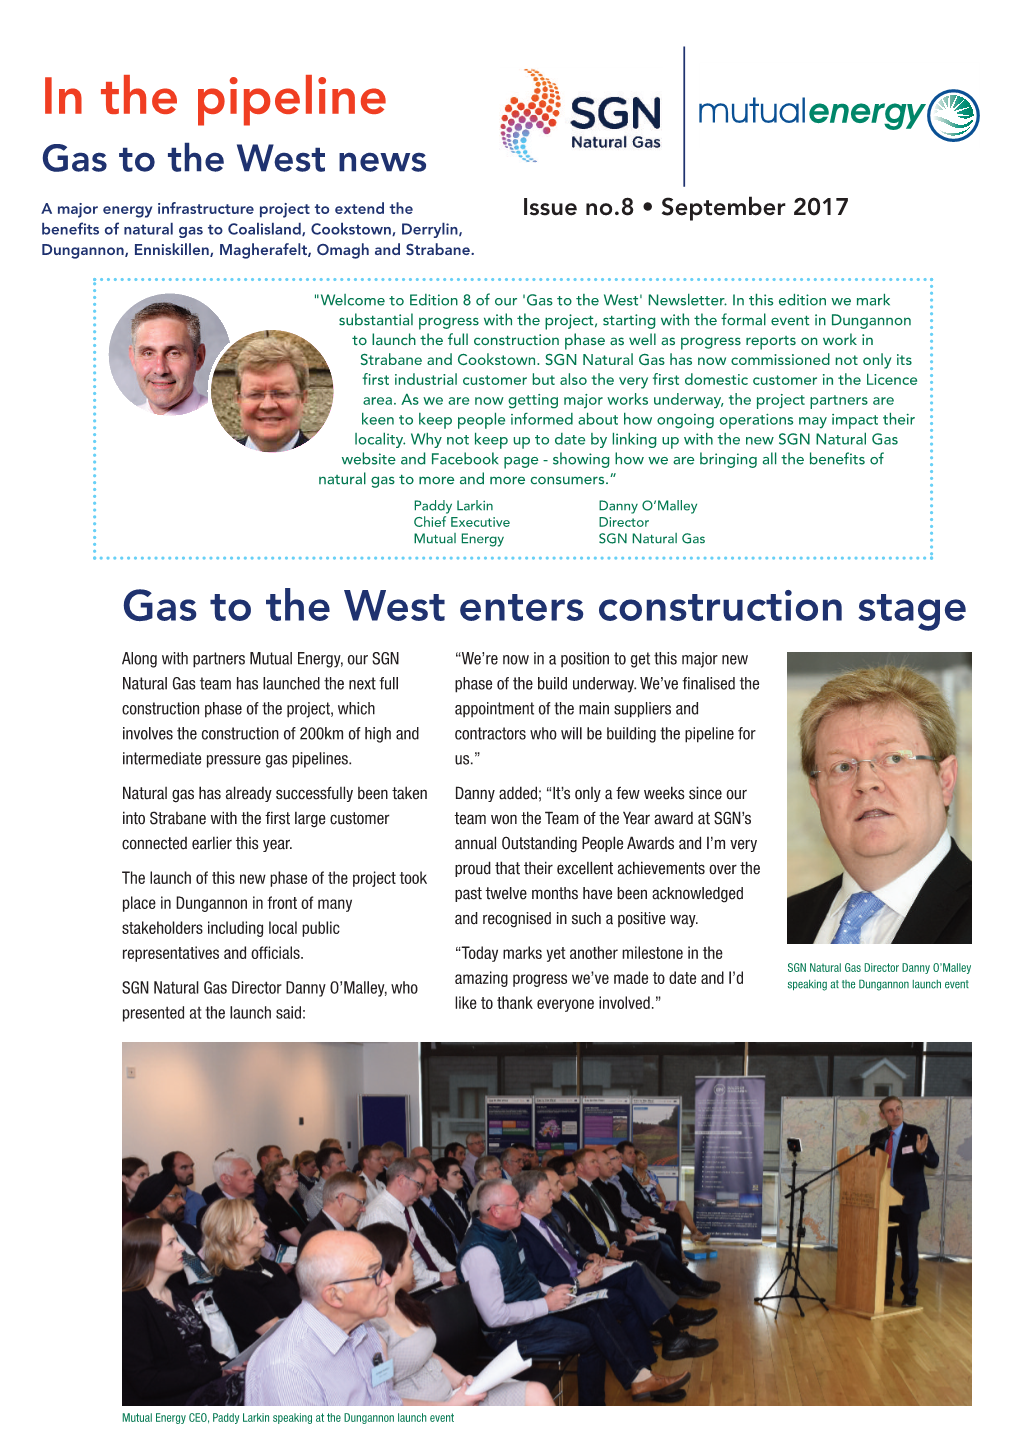 8Th Edition of Gas to the West Newsletter Published